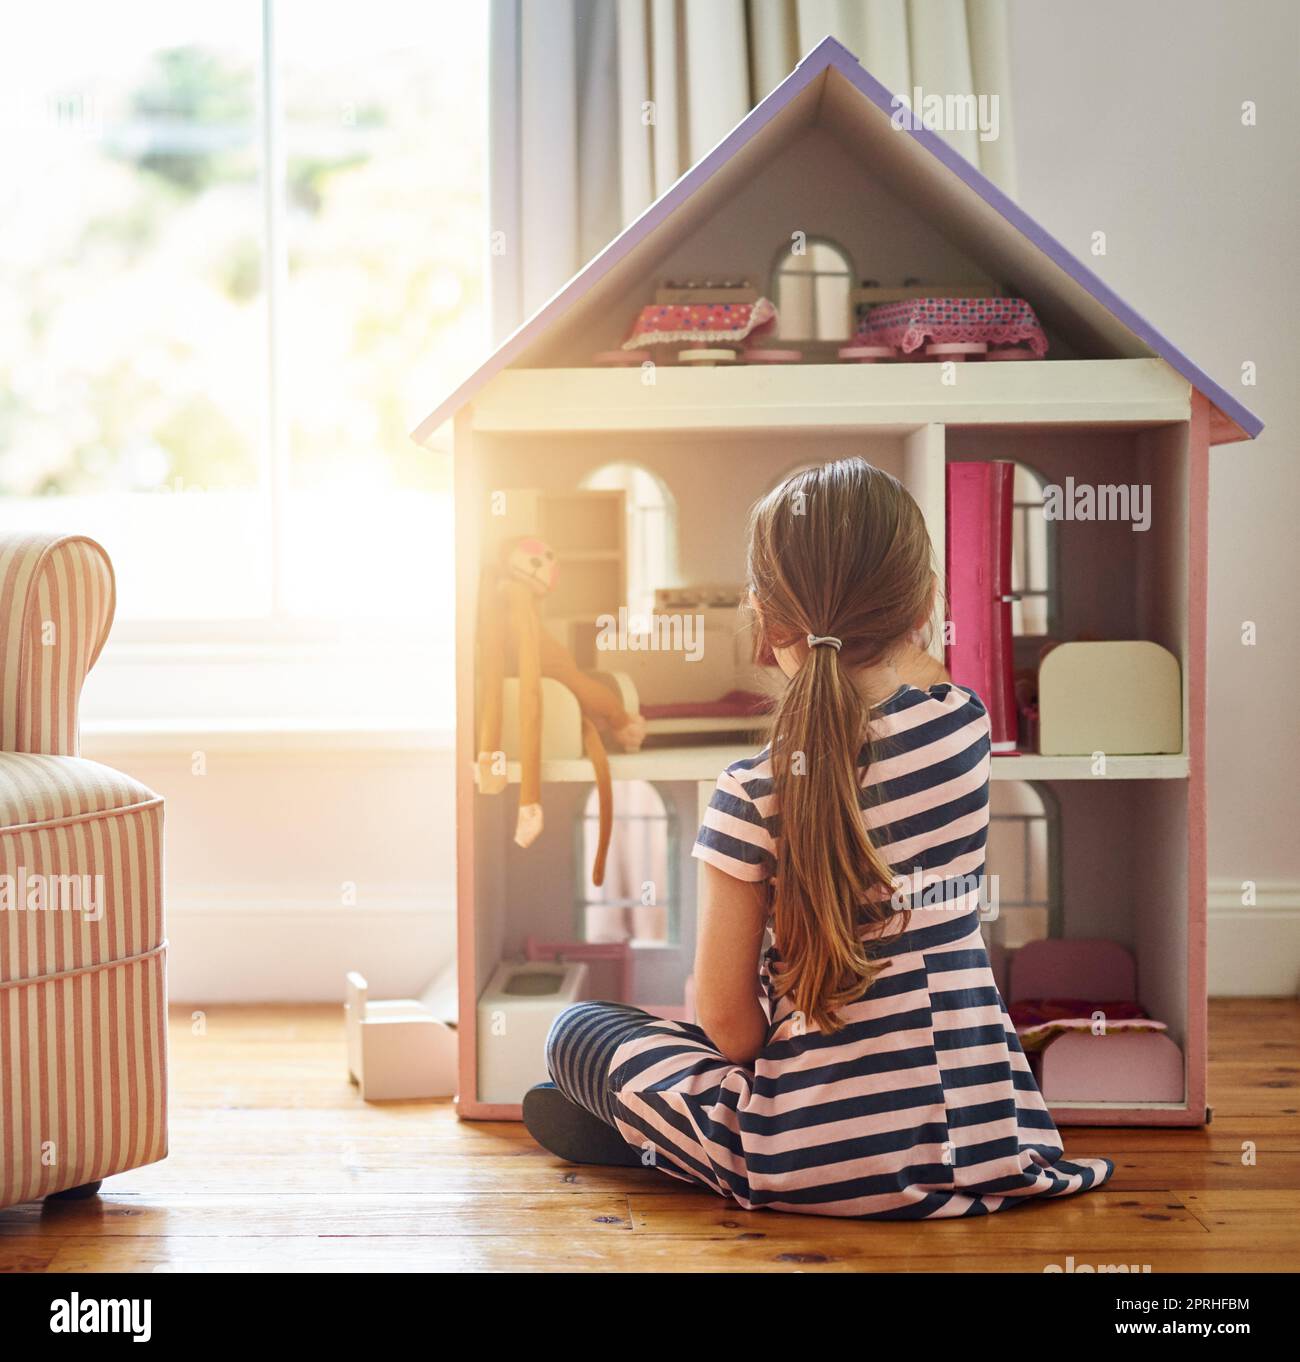 Giving her dolls a place to call home. a little girl playing with a dollhouse at home. Stock Photo